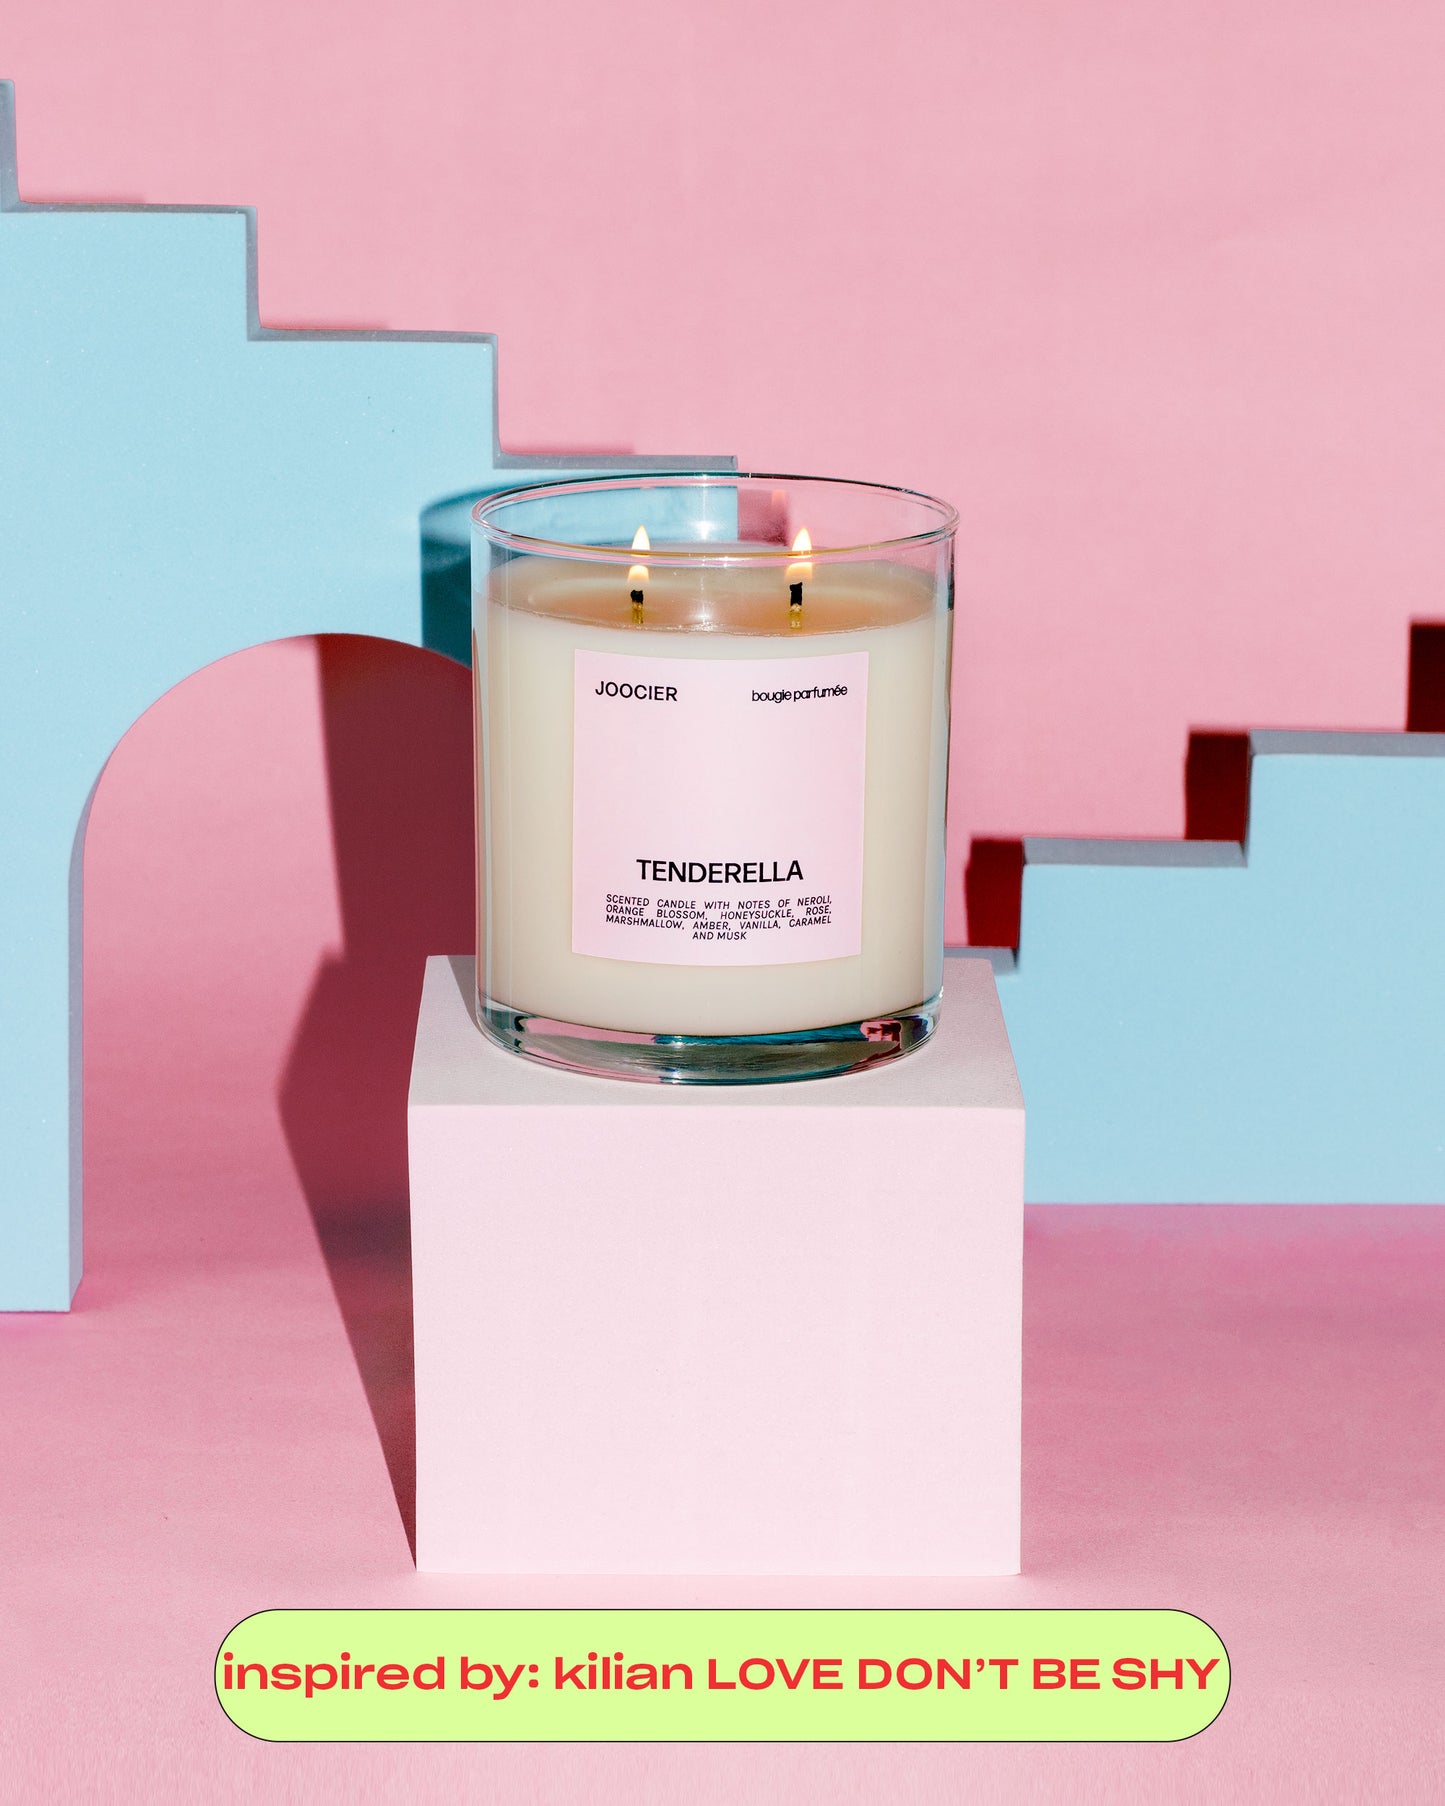 Kilian love don't be shy dupe candle. A candle that smells like marshmallow, vanilla, orange blossom, neroli, and more. A sweet floral candle made with coconut soy wax by Joocier, a woman owned dupe candle brand.